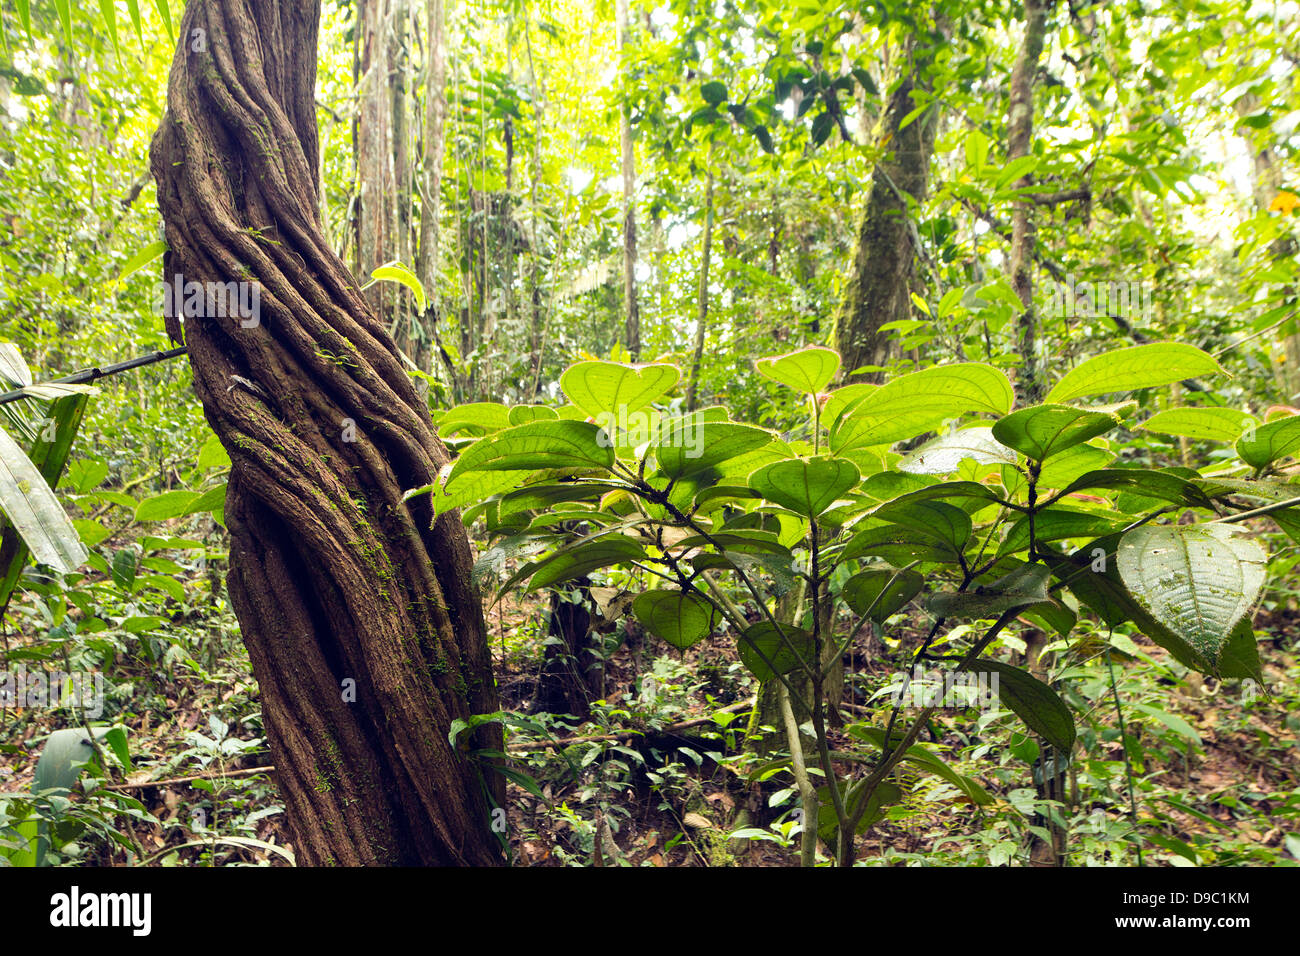 An old and twisted liana in the rainforest, Ecuador Stock Photo